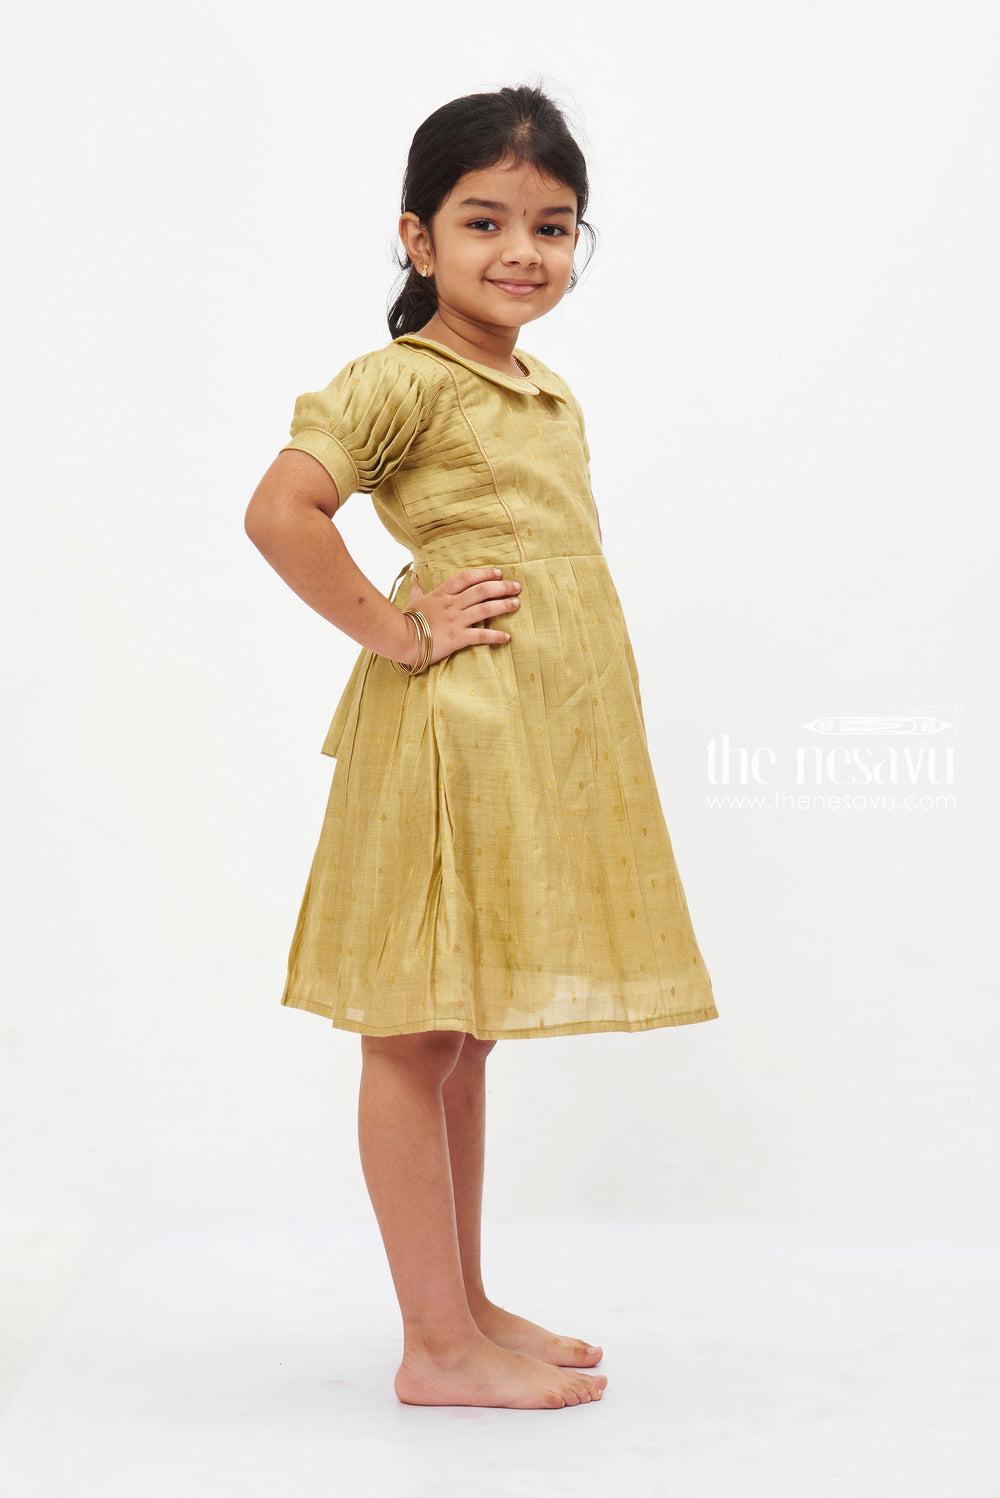 The Nesavu Girls Cotton Frock Olive Gold Charm Frock: Classic Puff Sleeve Dress with Golden Detailing for Girls Nesavu Traditional Olive Green Puff Sleeve Dress for Girls | Elegant Gold Trimmed Frock | The Nesavu